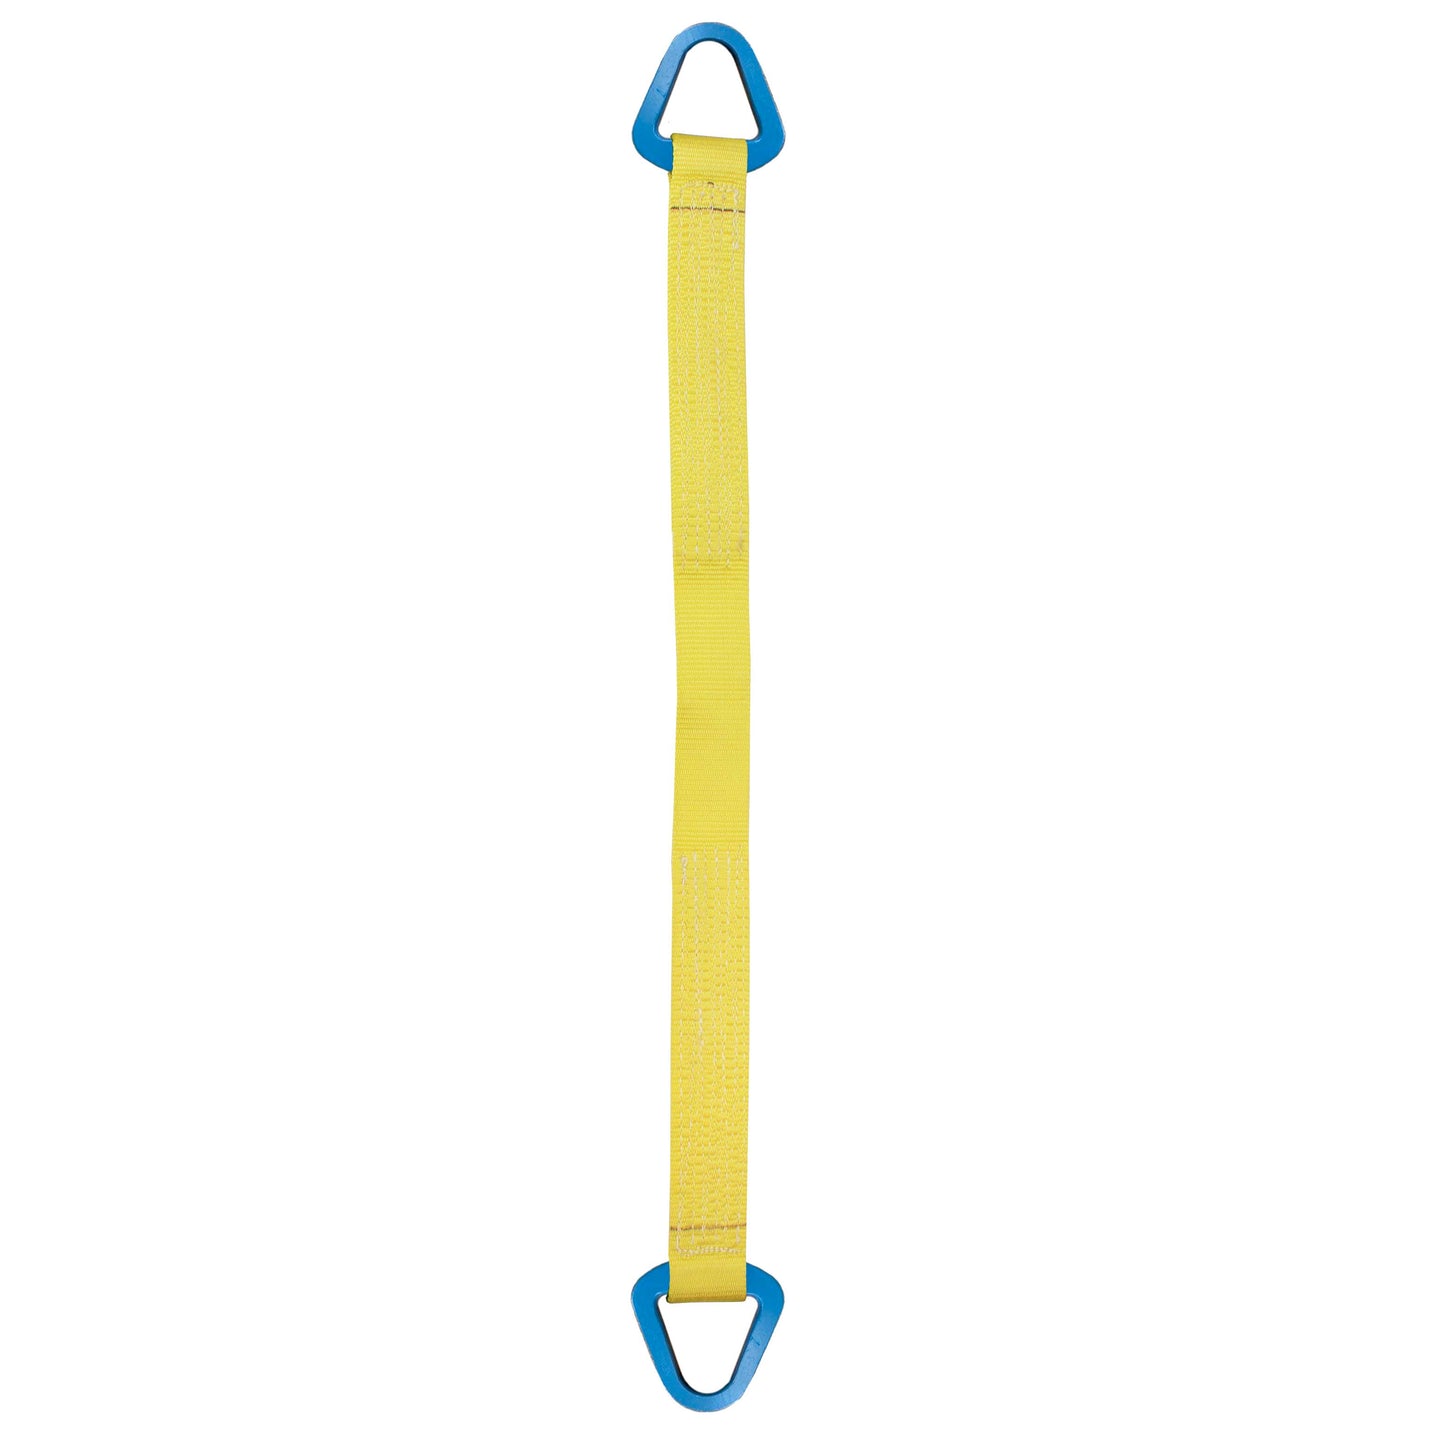 Nylon Lifting Sling Triangle 4 inch x 3 foot 1ply image 1 of 2